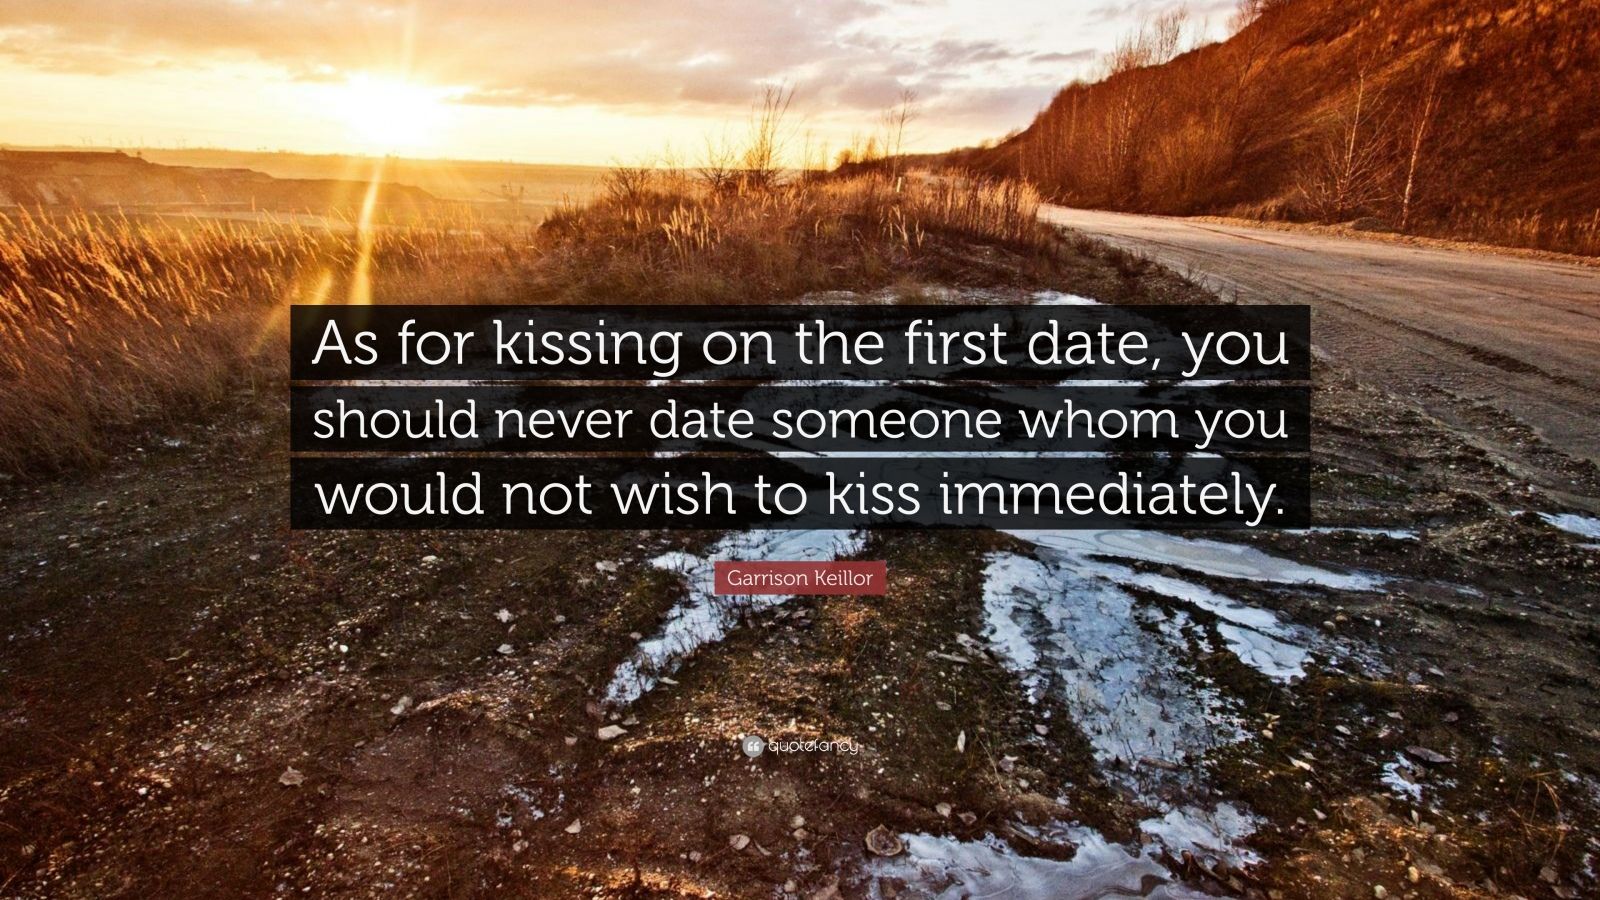 hould you kiss on the first date if you met online